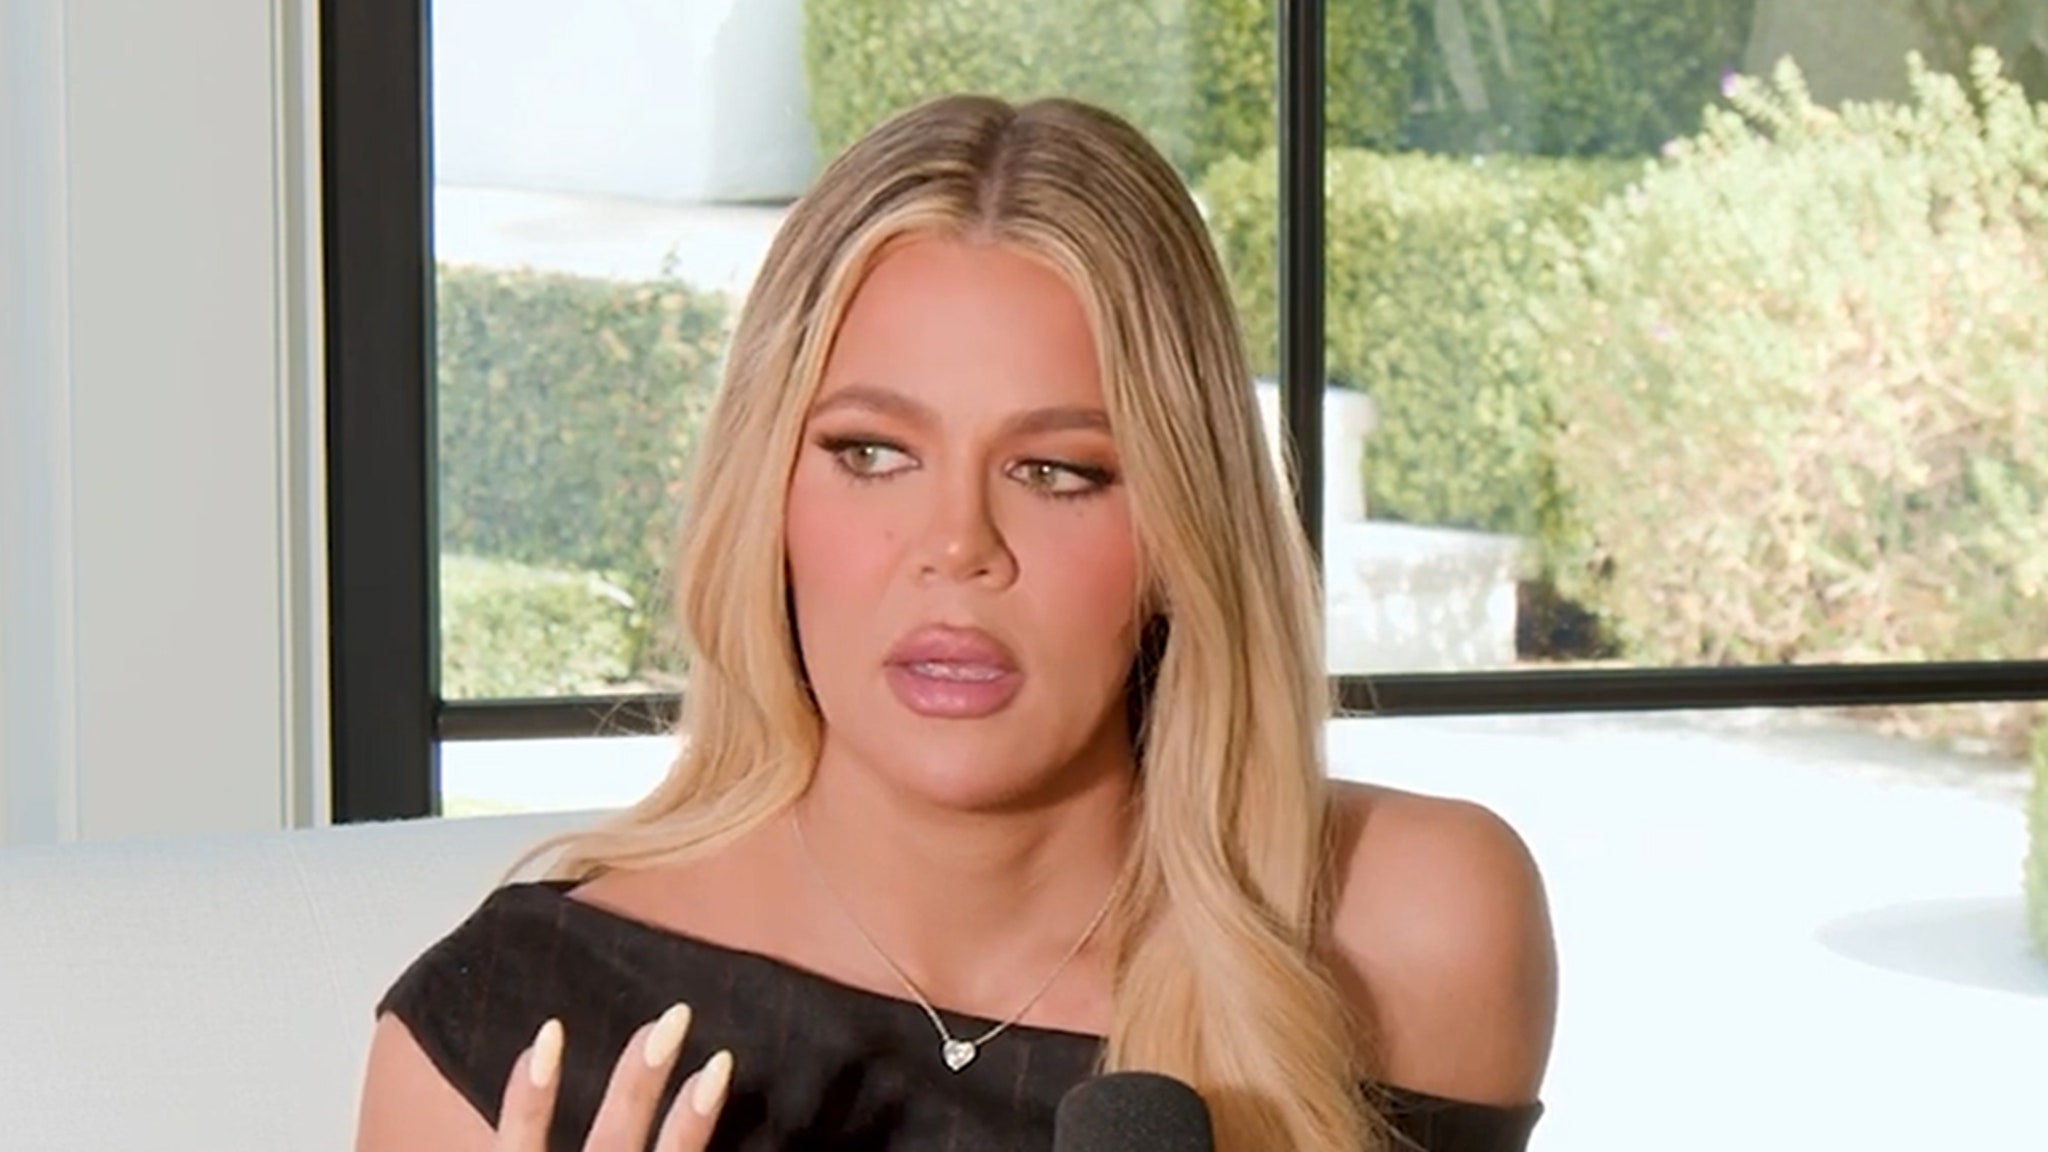 Khloe Kardashian Was Torn About Picking Up Her Baby Boy When He Was Born